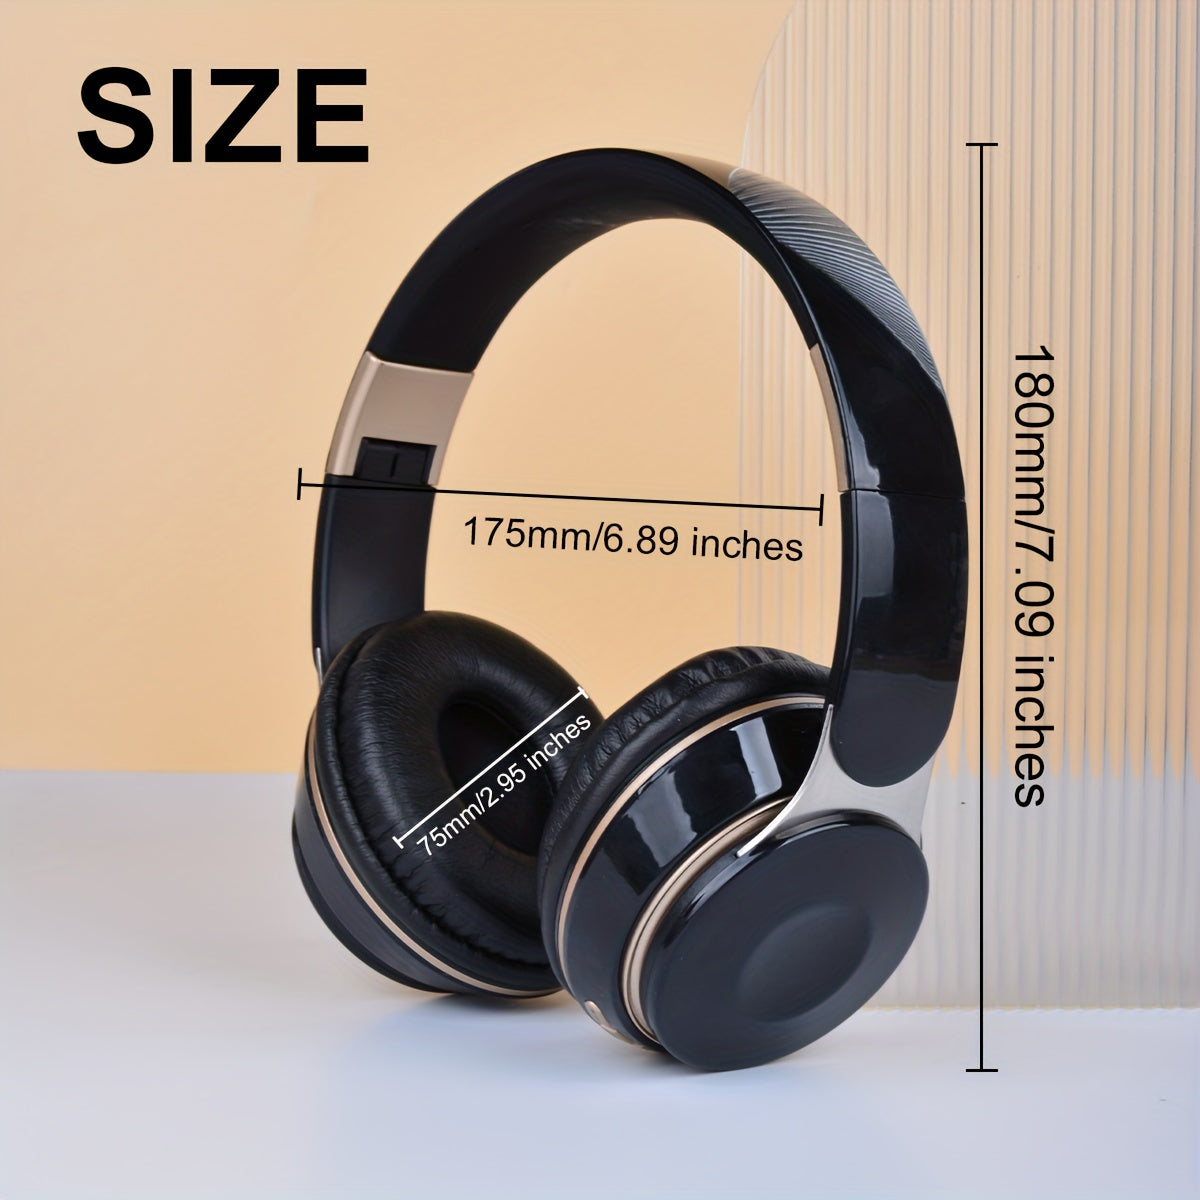 Wireless Over-Ear Headphones with Stereo Sound and Heavy Bass